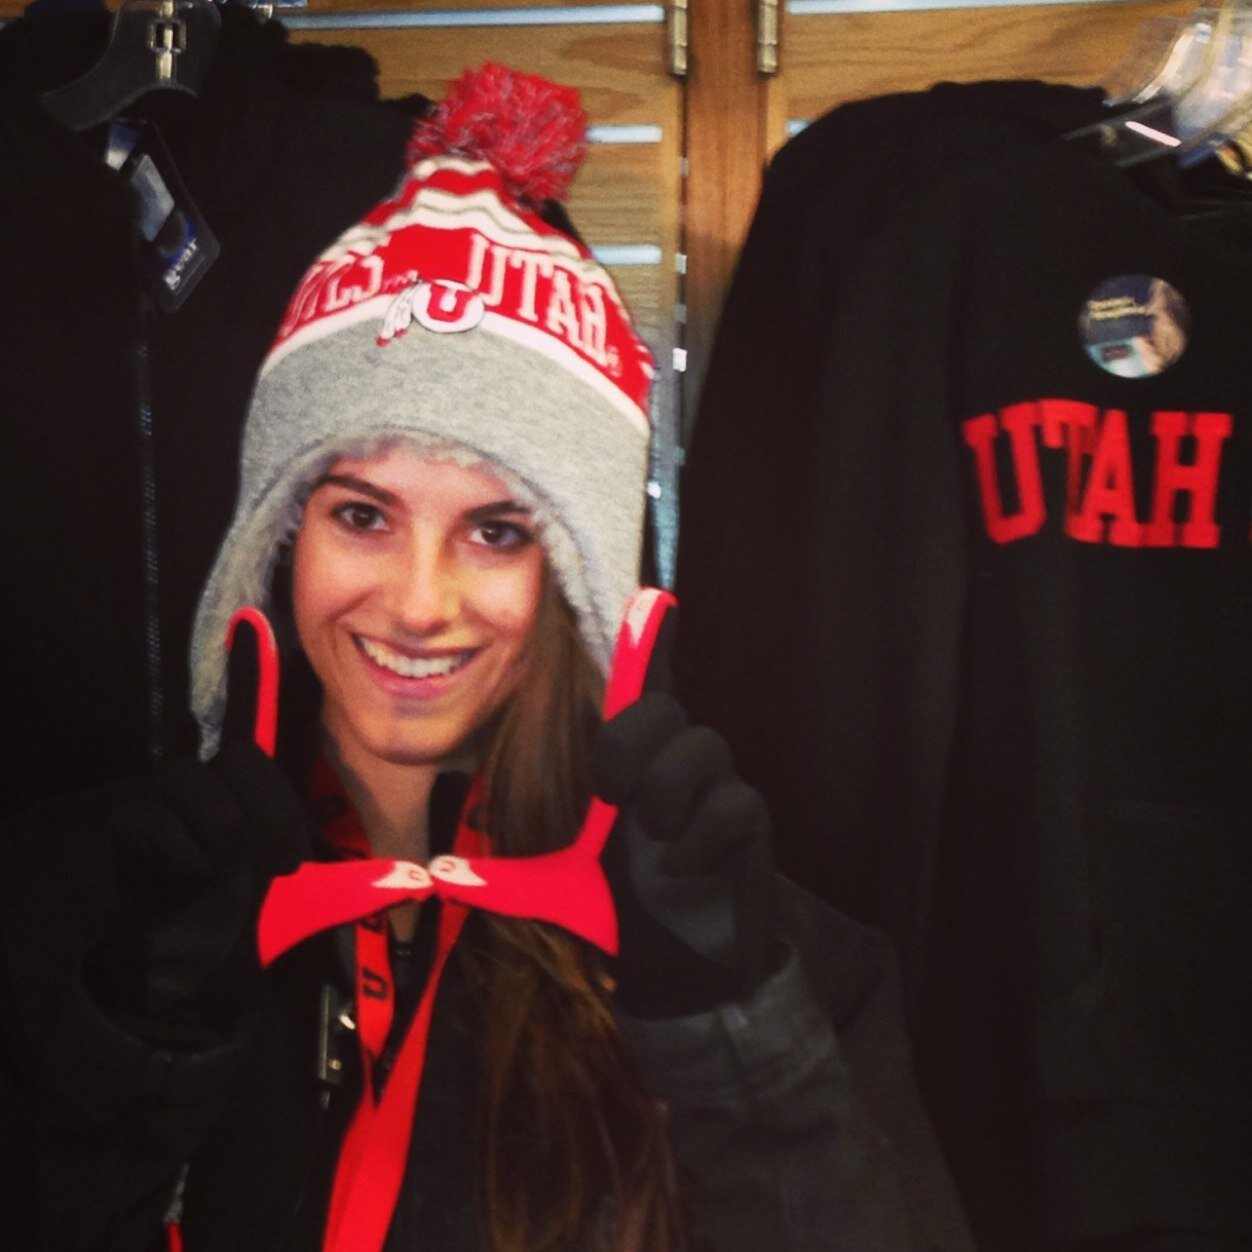 Born and raised Utah fan! Event coordinator for Utah Red Zones. Marketing is in my blood. I crave a good bike ride or solid water ski run daily.